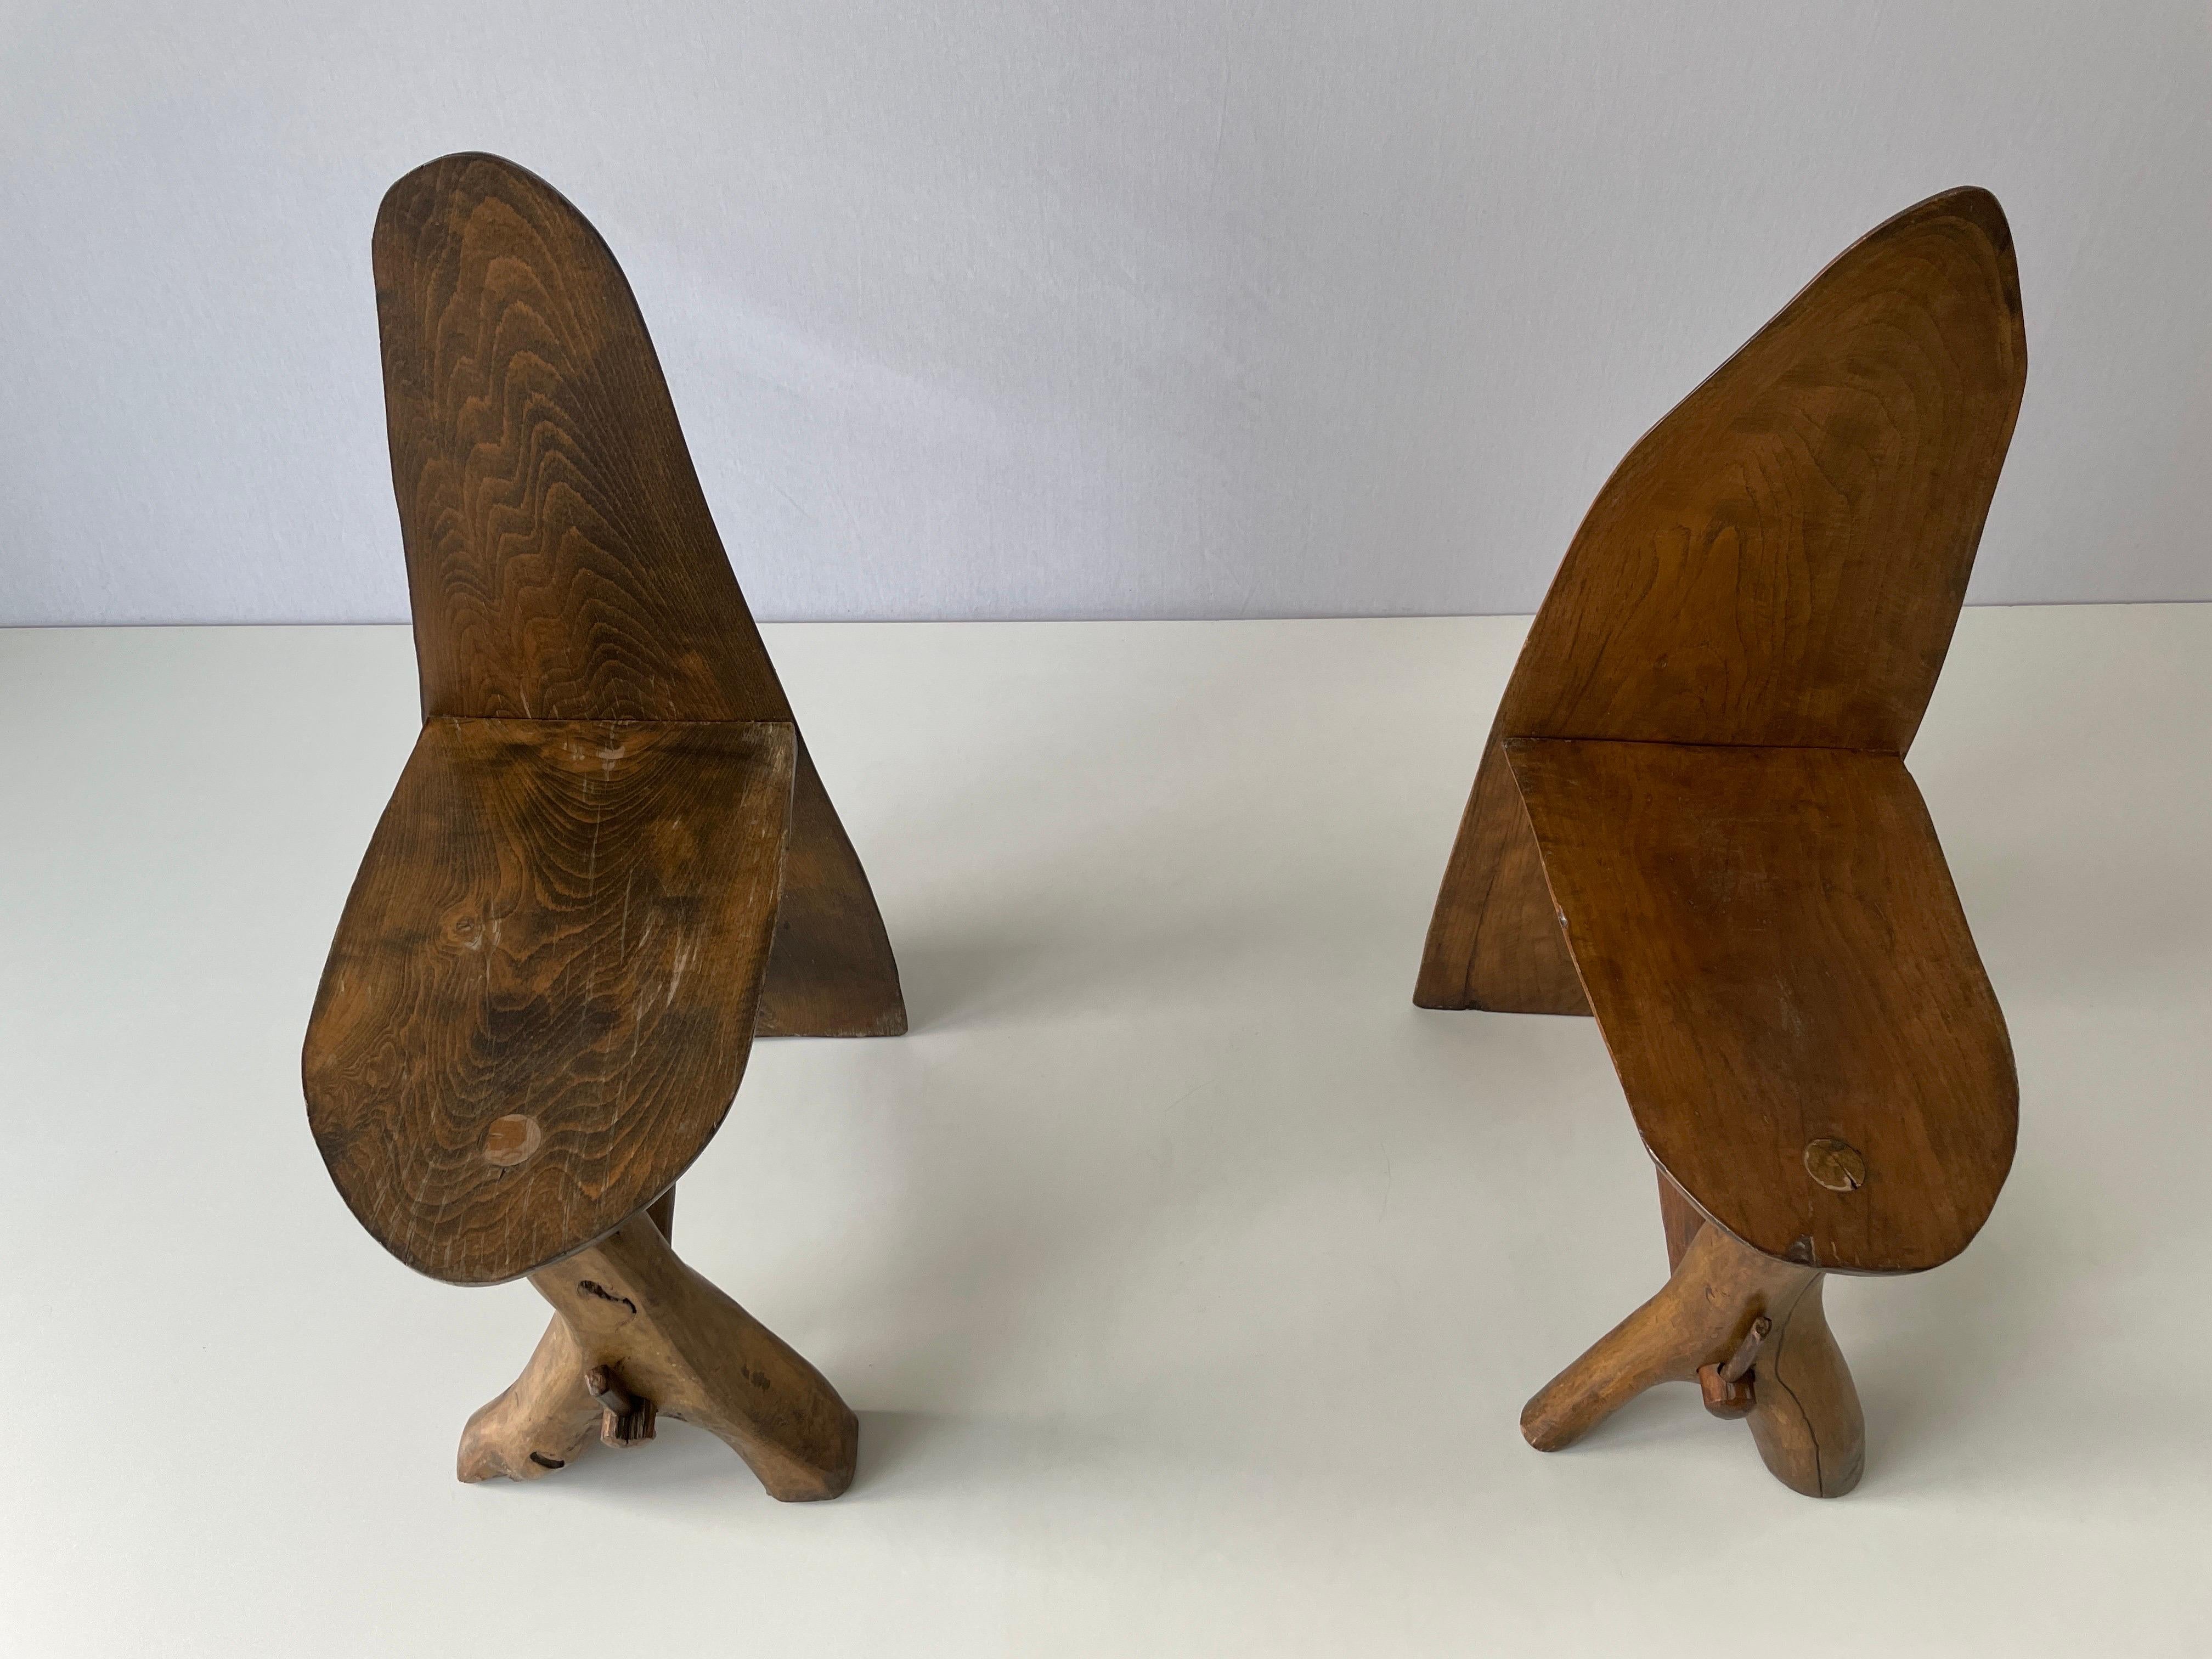 Hand-crafted Primitive Design Solid Wood Pair of Chairs, 1950s, Italy For Sale 1